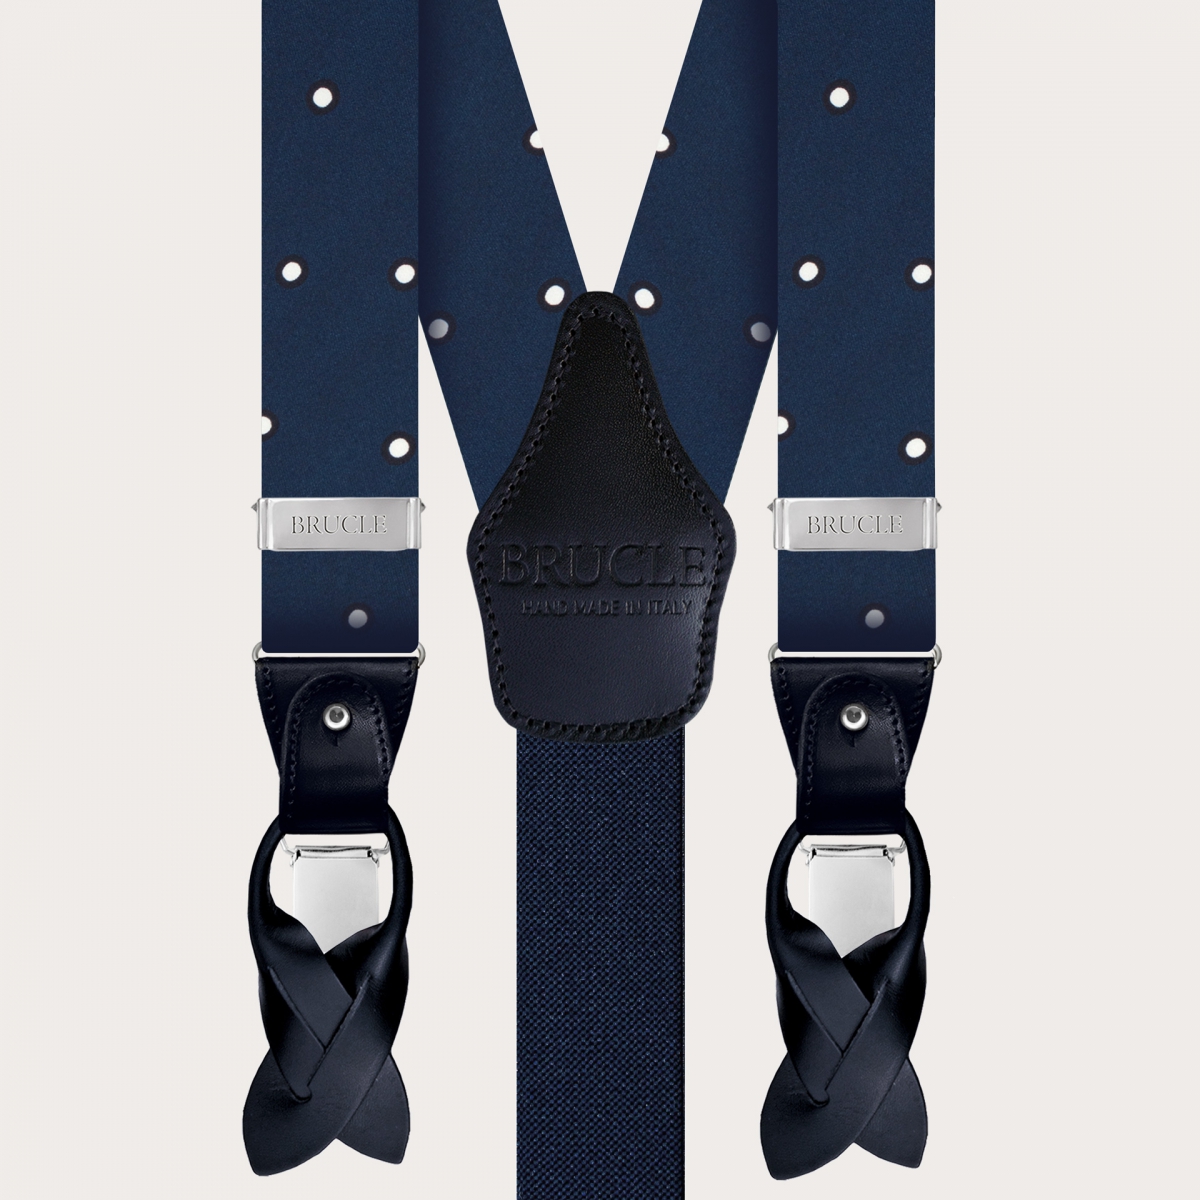 BRUCLE Set of suspenders and bow tie in blue silk with white polka dot pattern